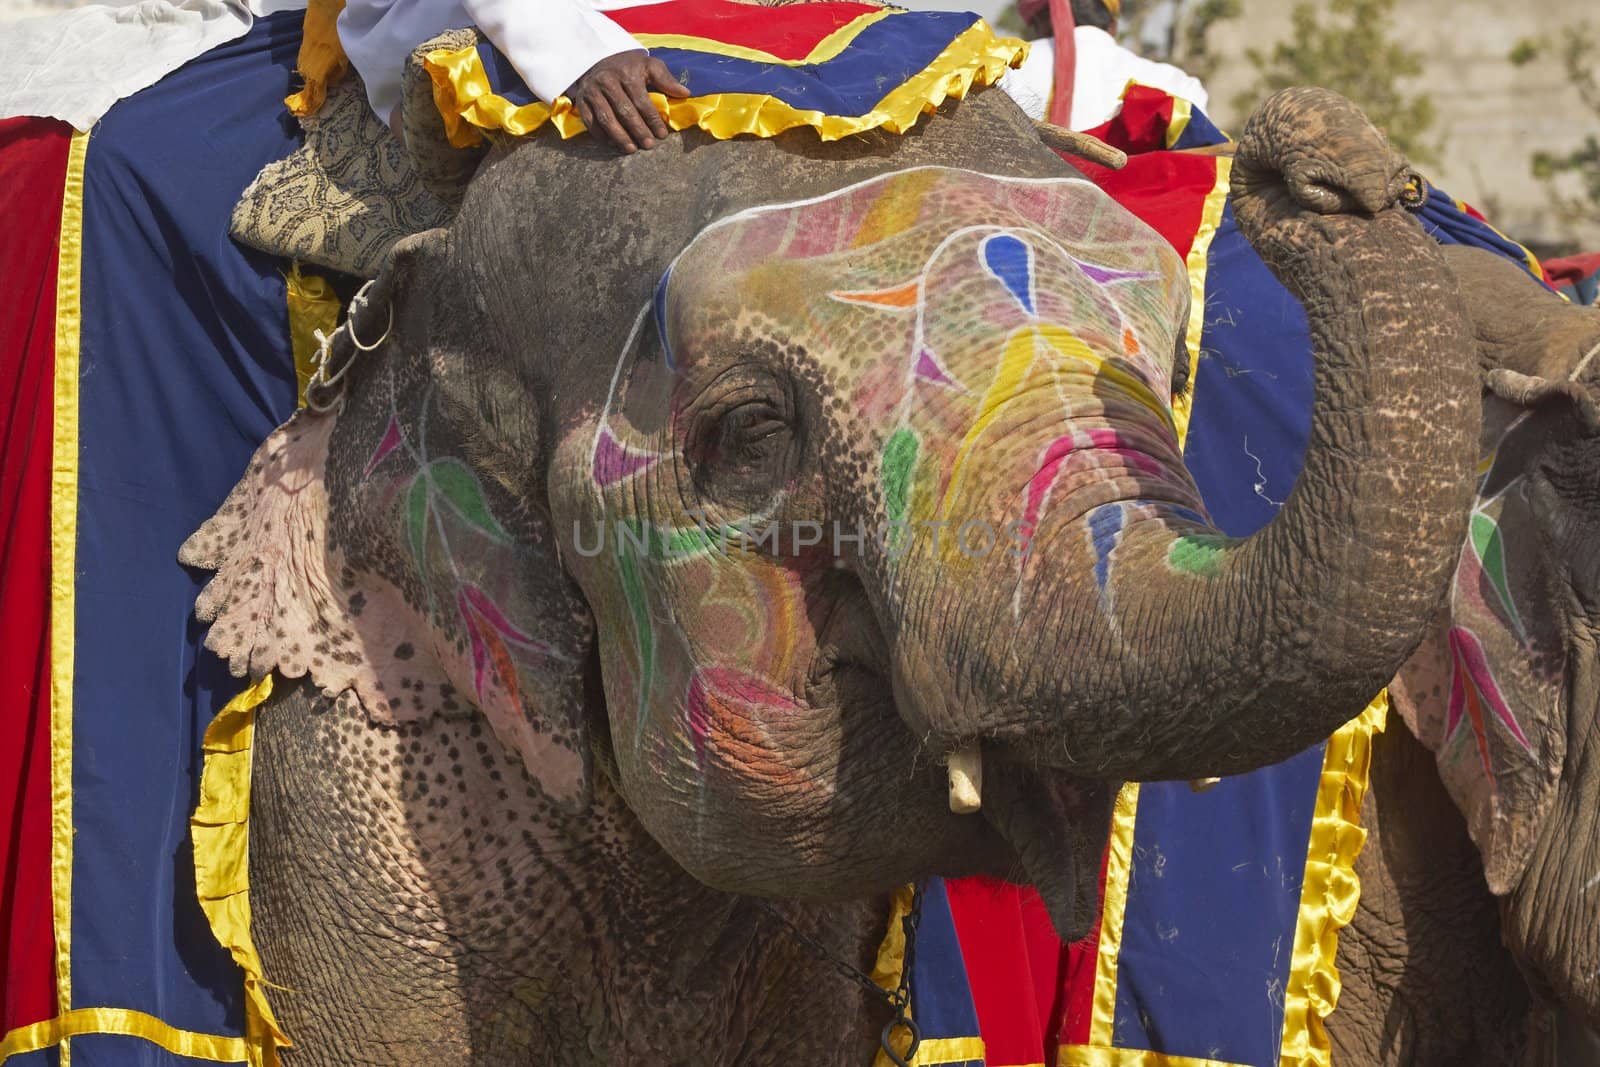 Decorated elephant saluting with its trunk at the annual elephant festival in Jaipur, India